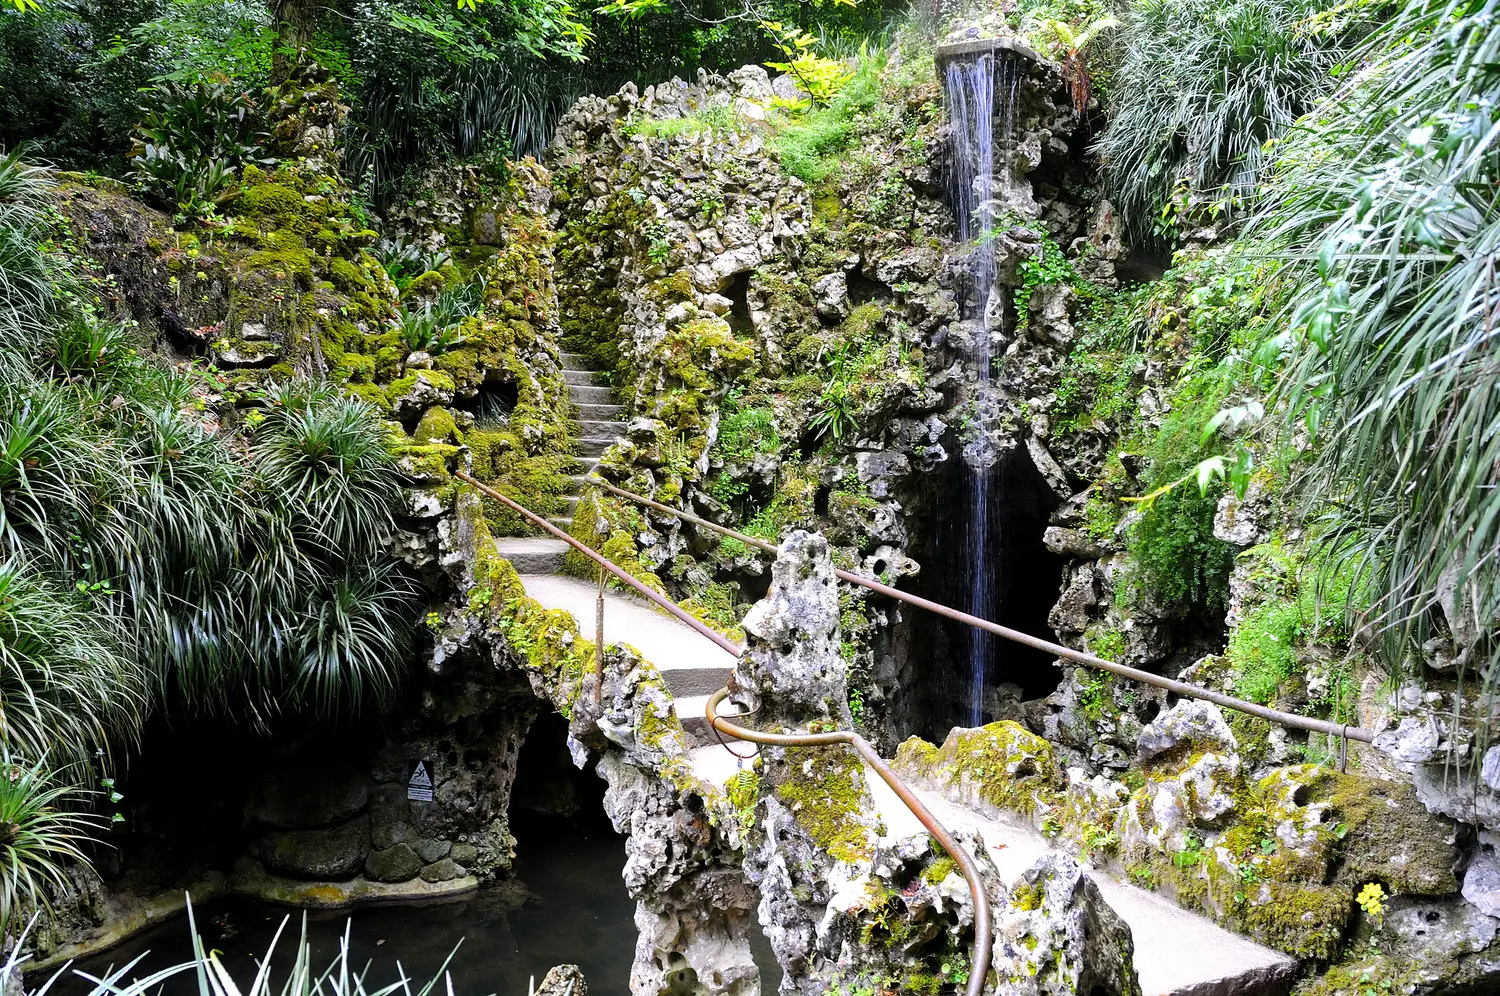 Grey narrow stone bridge with moss leading towards a staircase surrounded by a greenery and a small waterfall on the left at Quinta da Regaleira in Sintra.